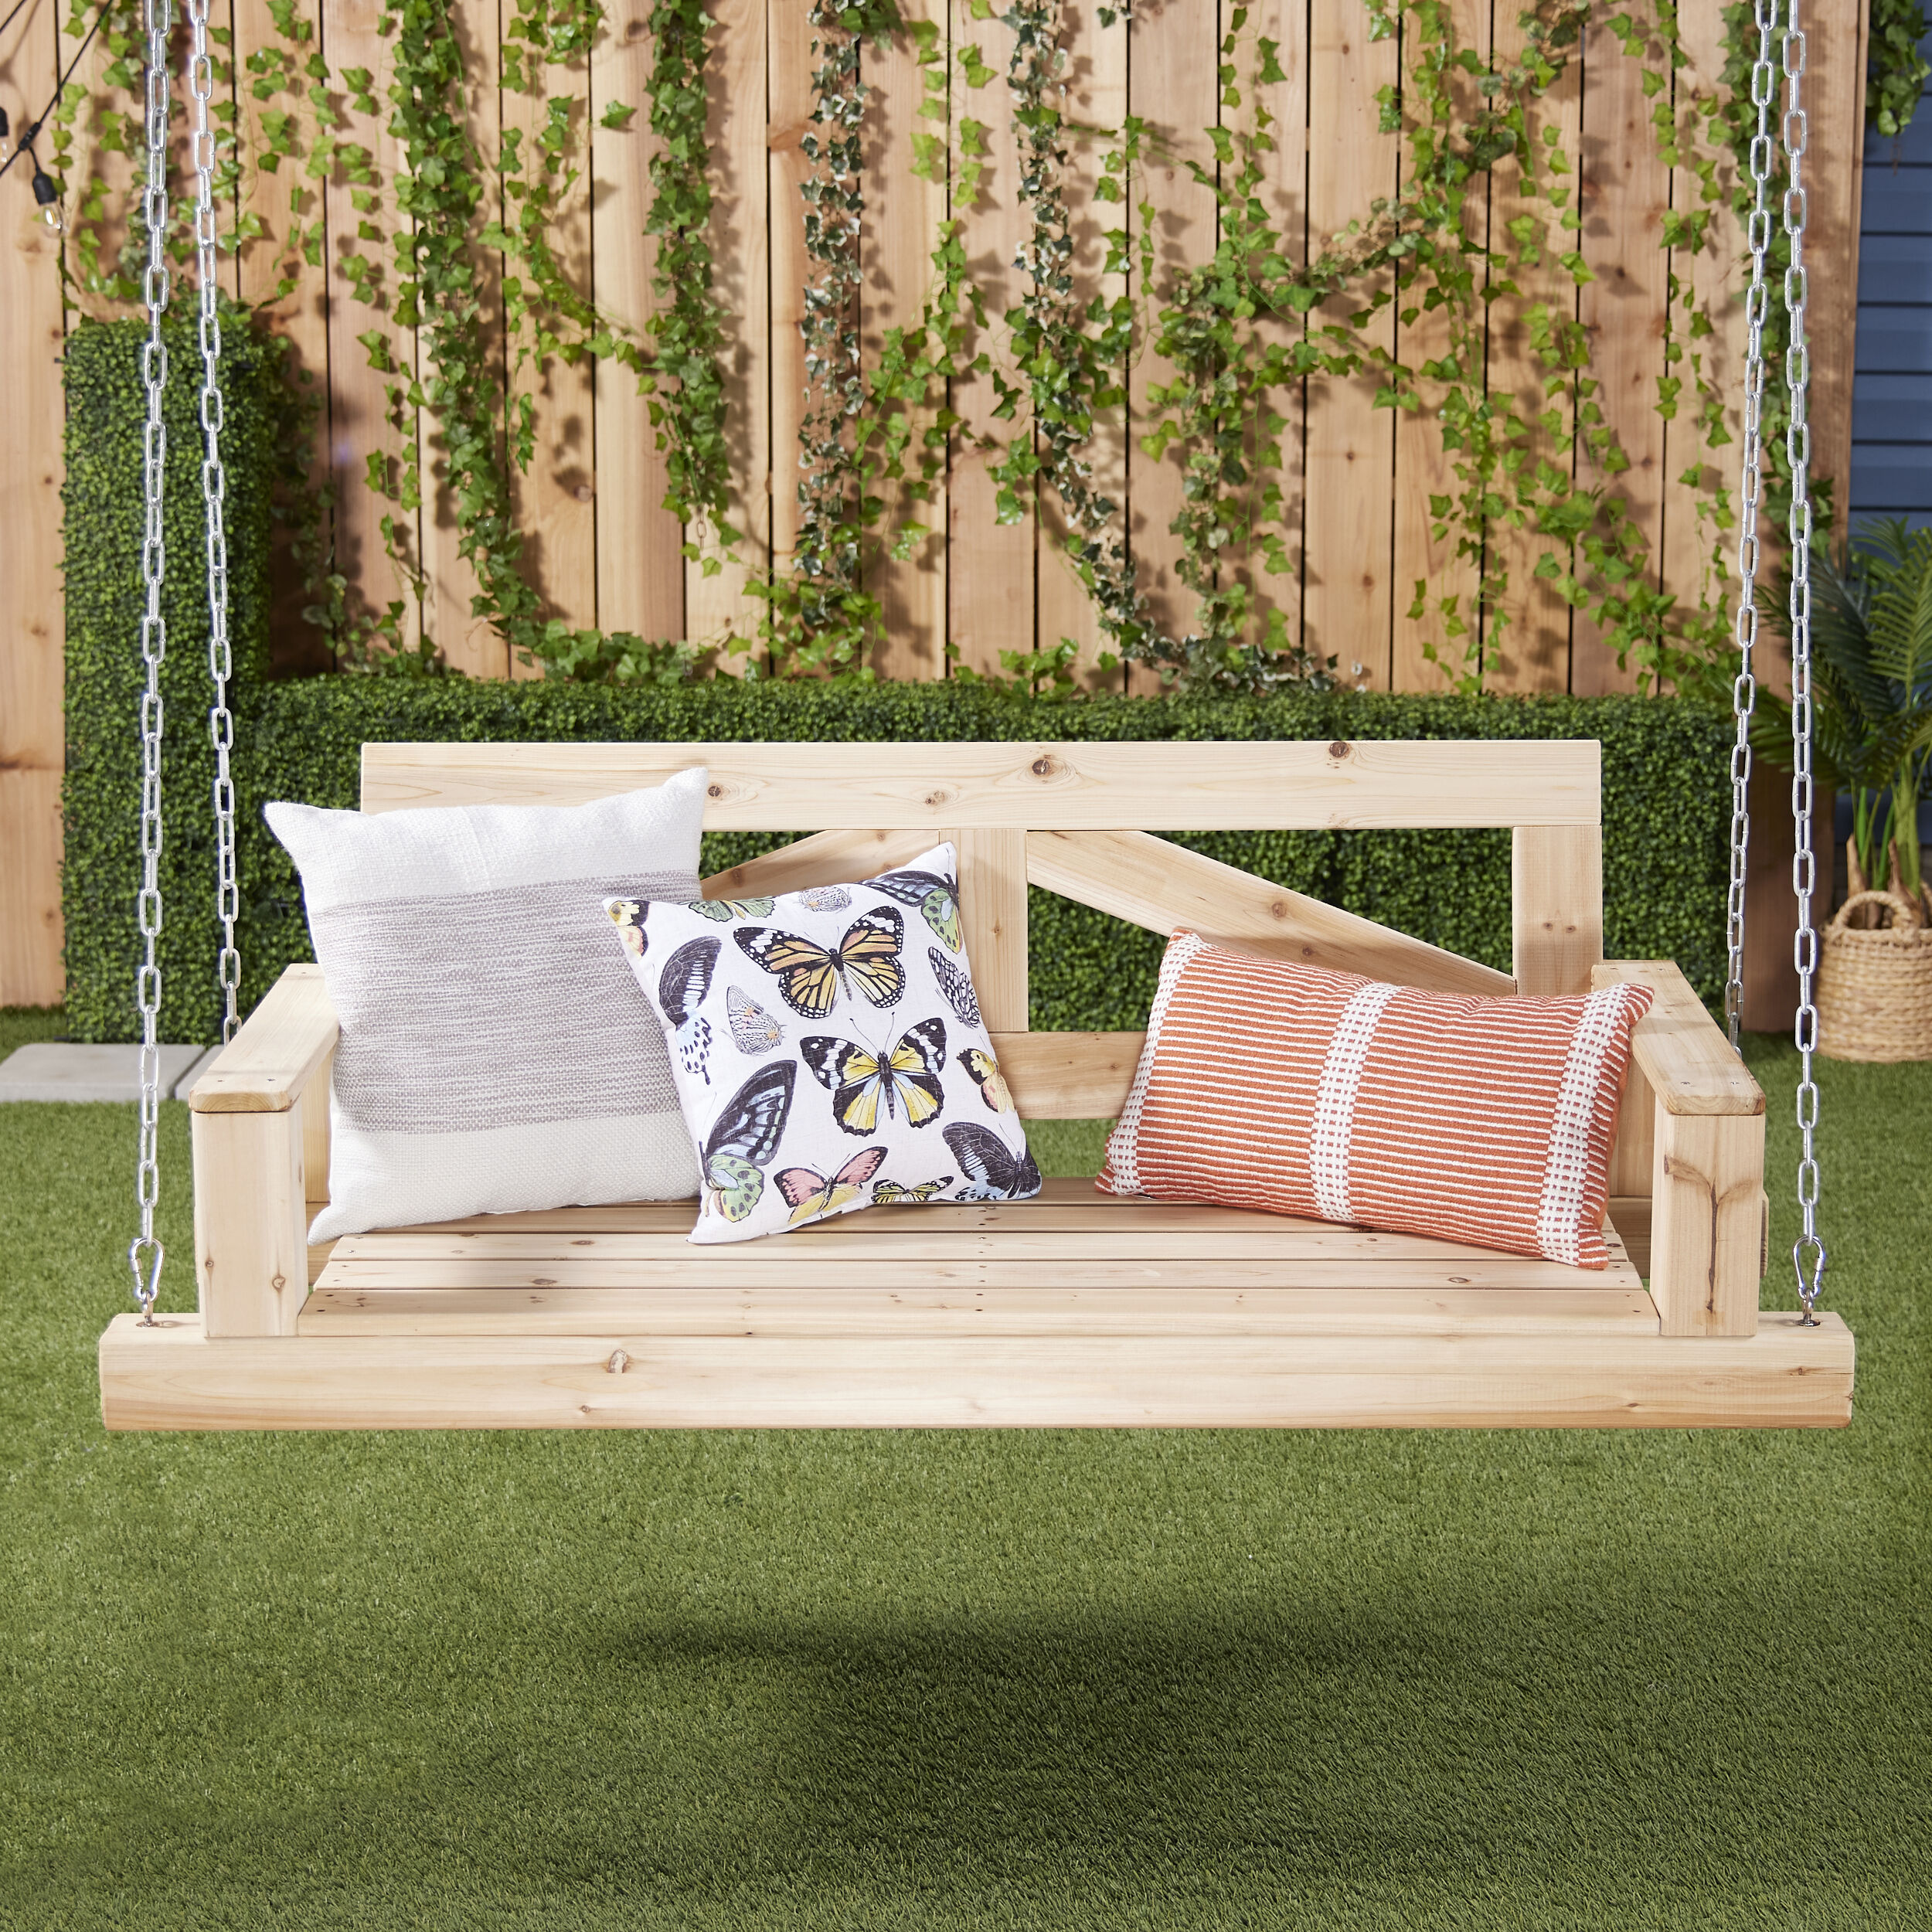 Barn-Shed-Play Black Replacement Porch Swing And Daybed Swing Bed